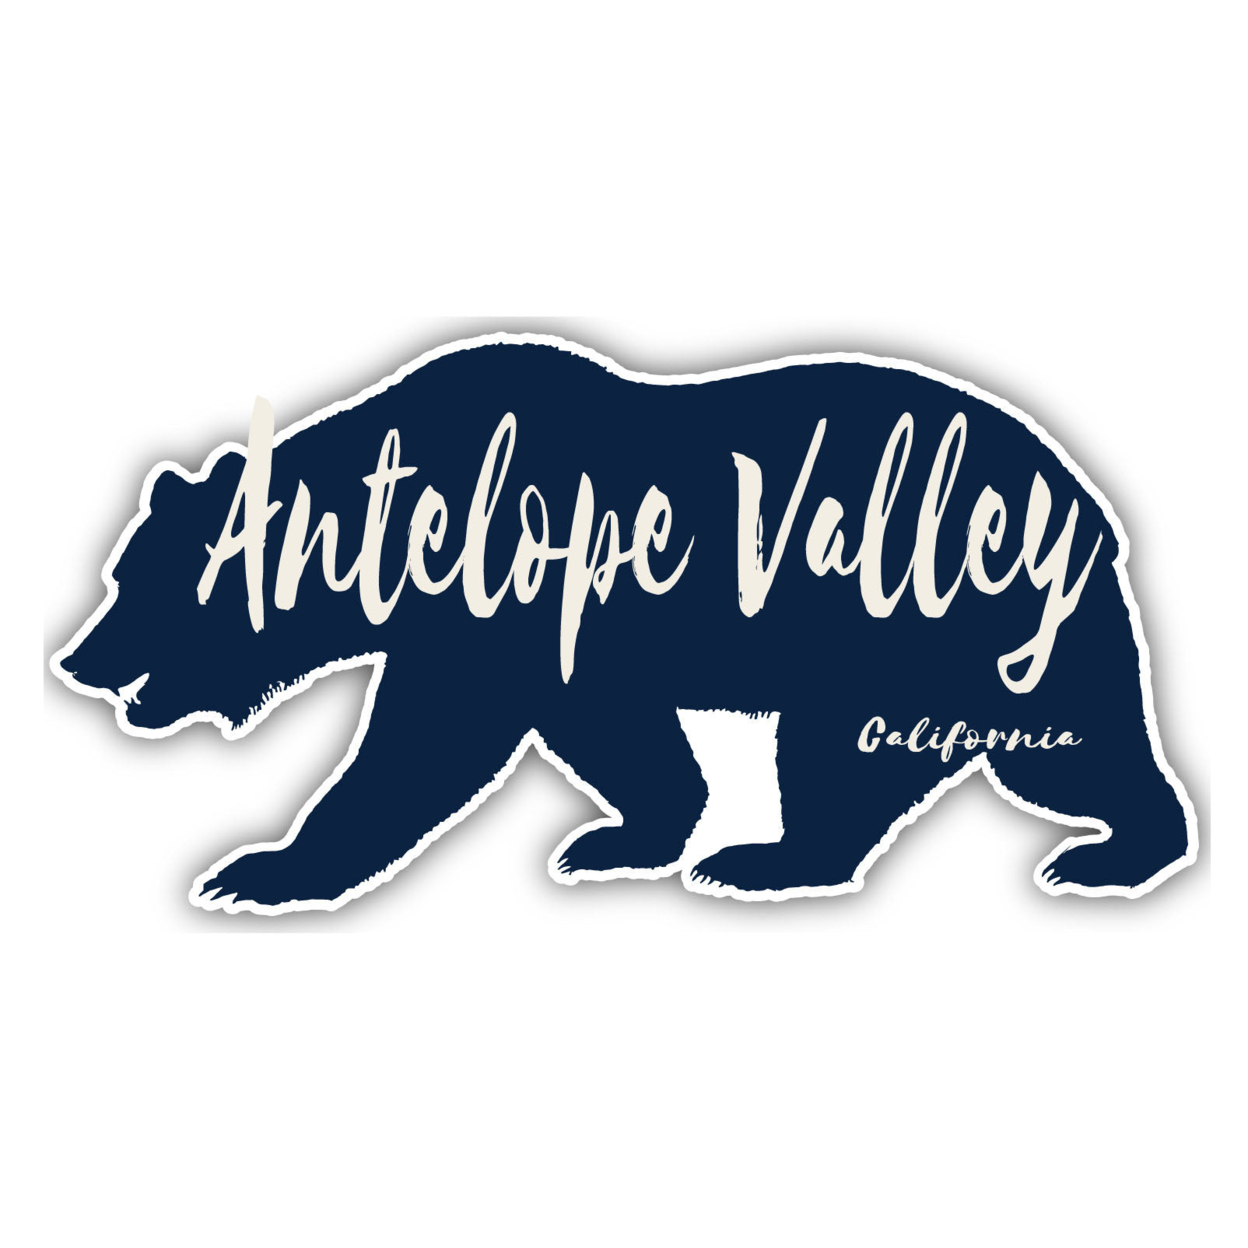 Antelope Valley California Souvenir Decorative Stickers (Choose Theme And Size) - Single Unit, 8-Inch, Tent